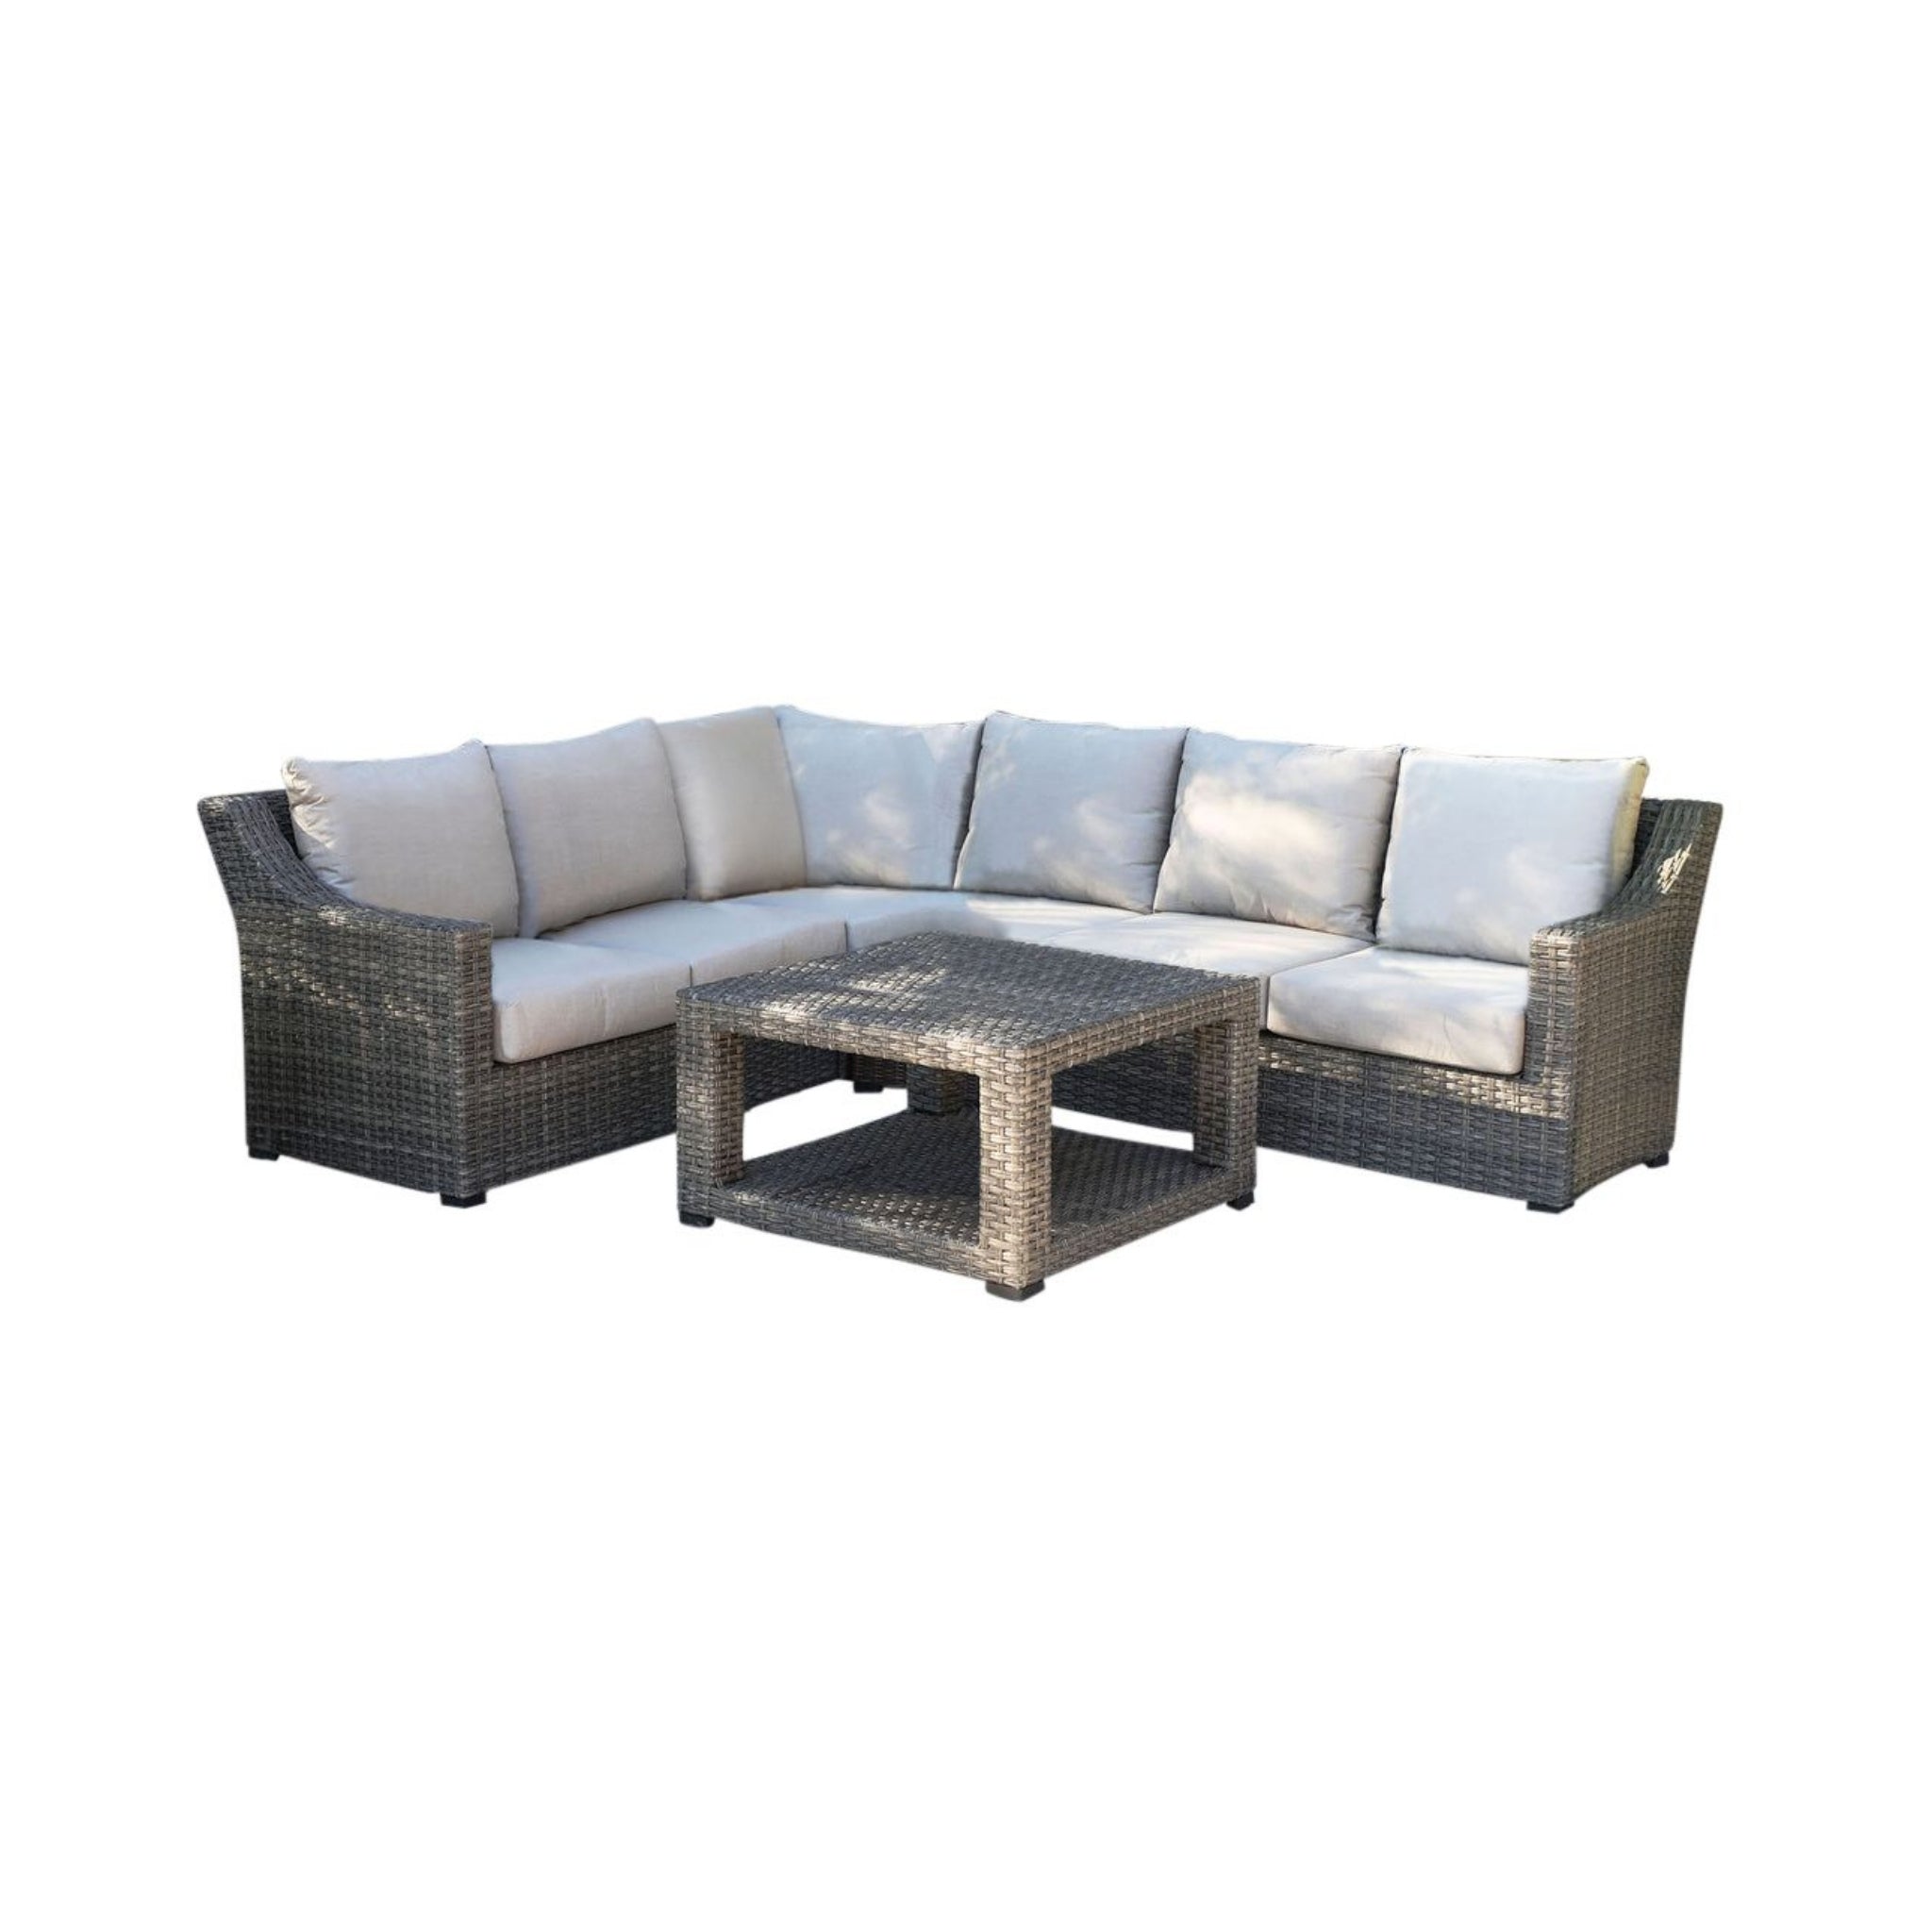 Campden Grey 5pc Outdoor Seating Sectional